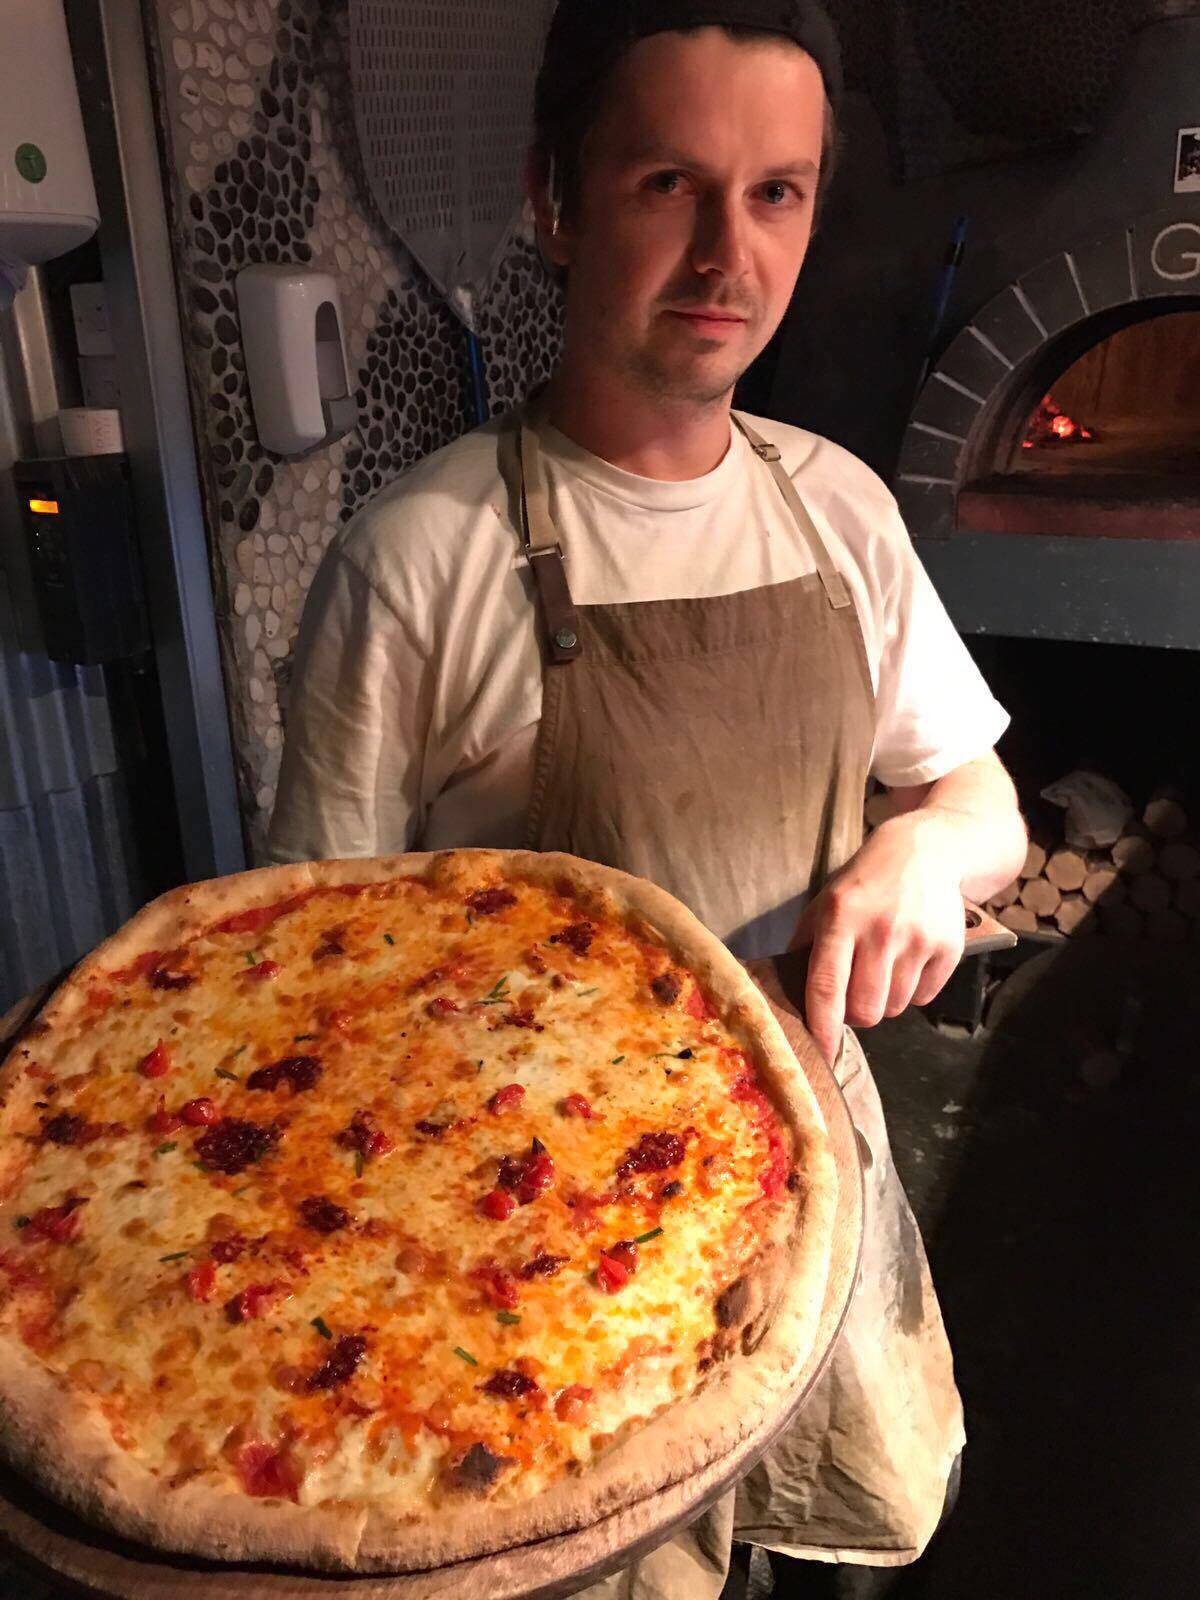 Liverpool chef among finalists In National Pizza Awards